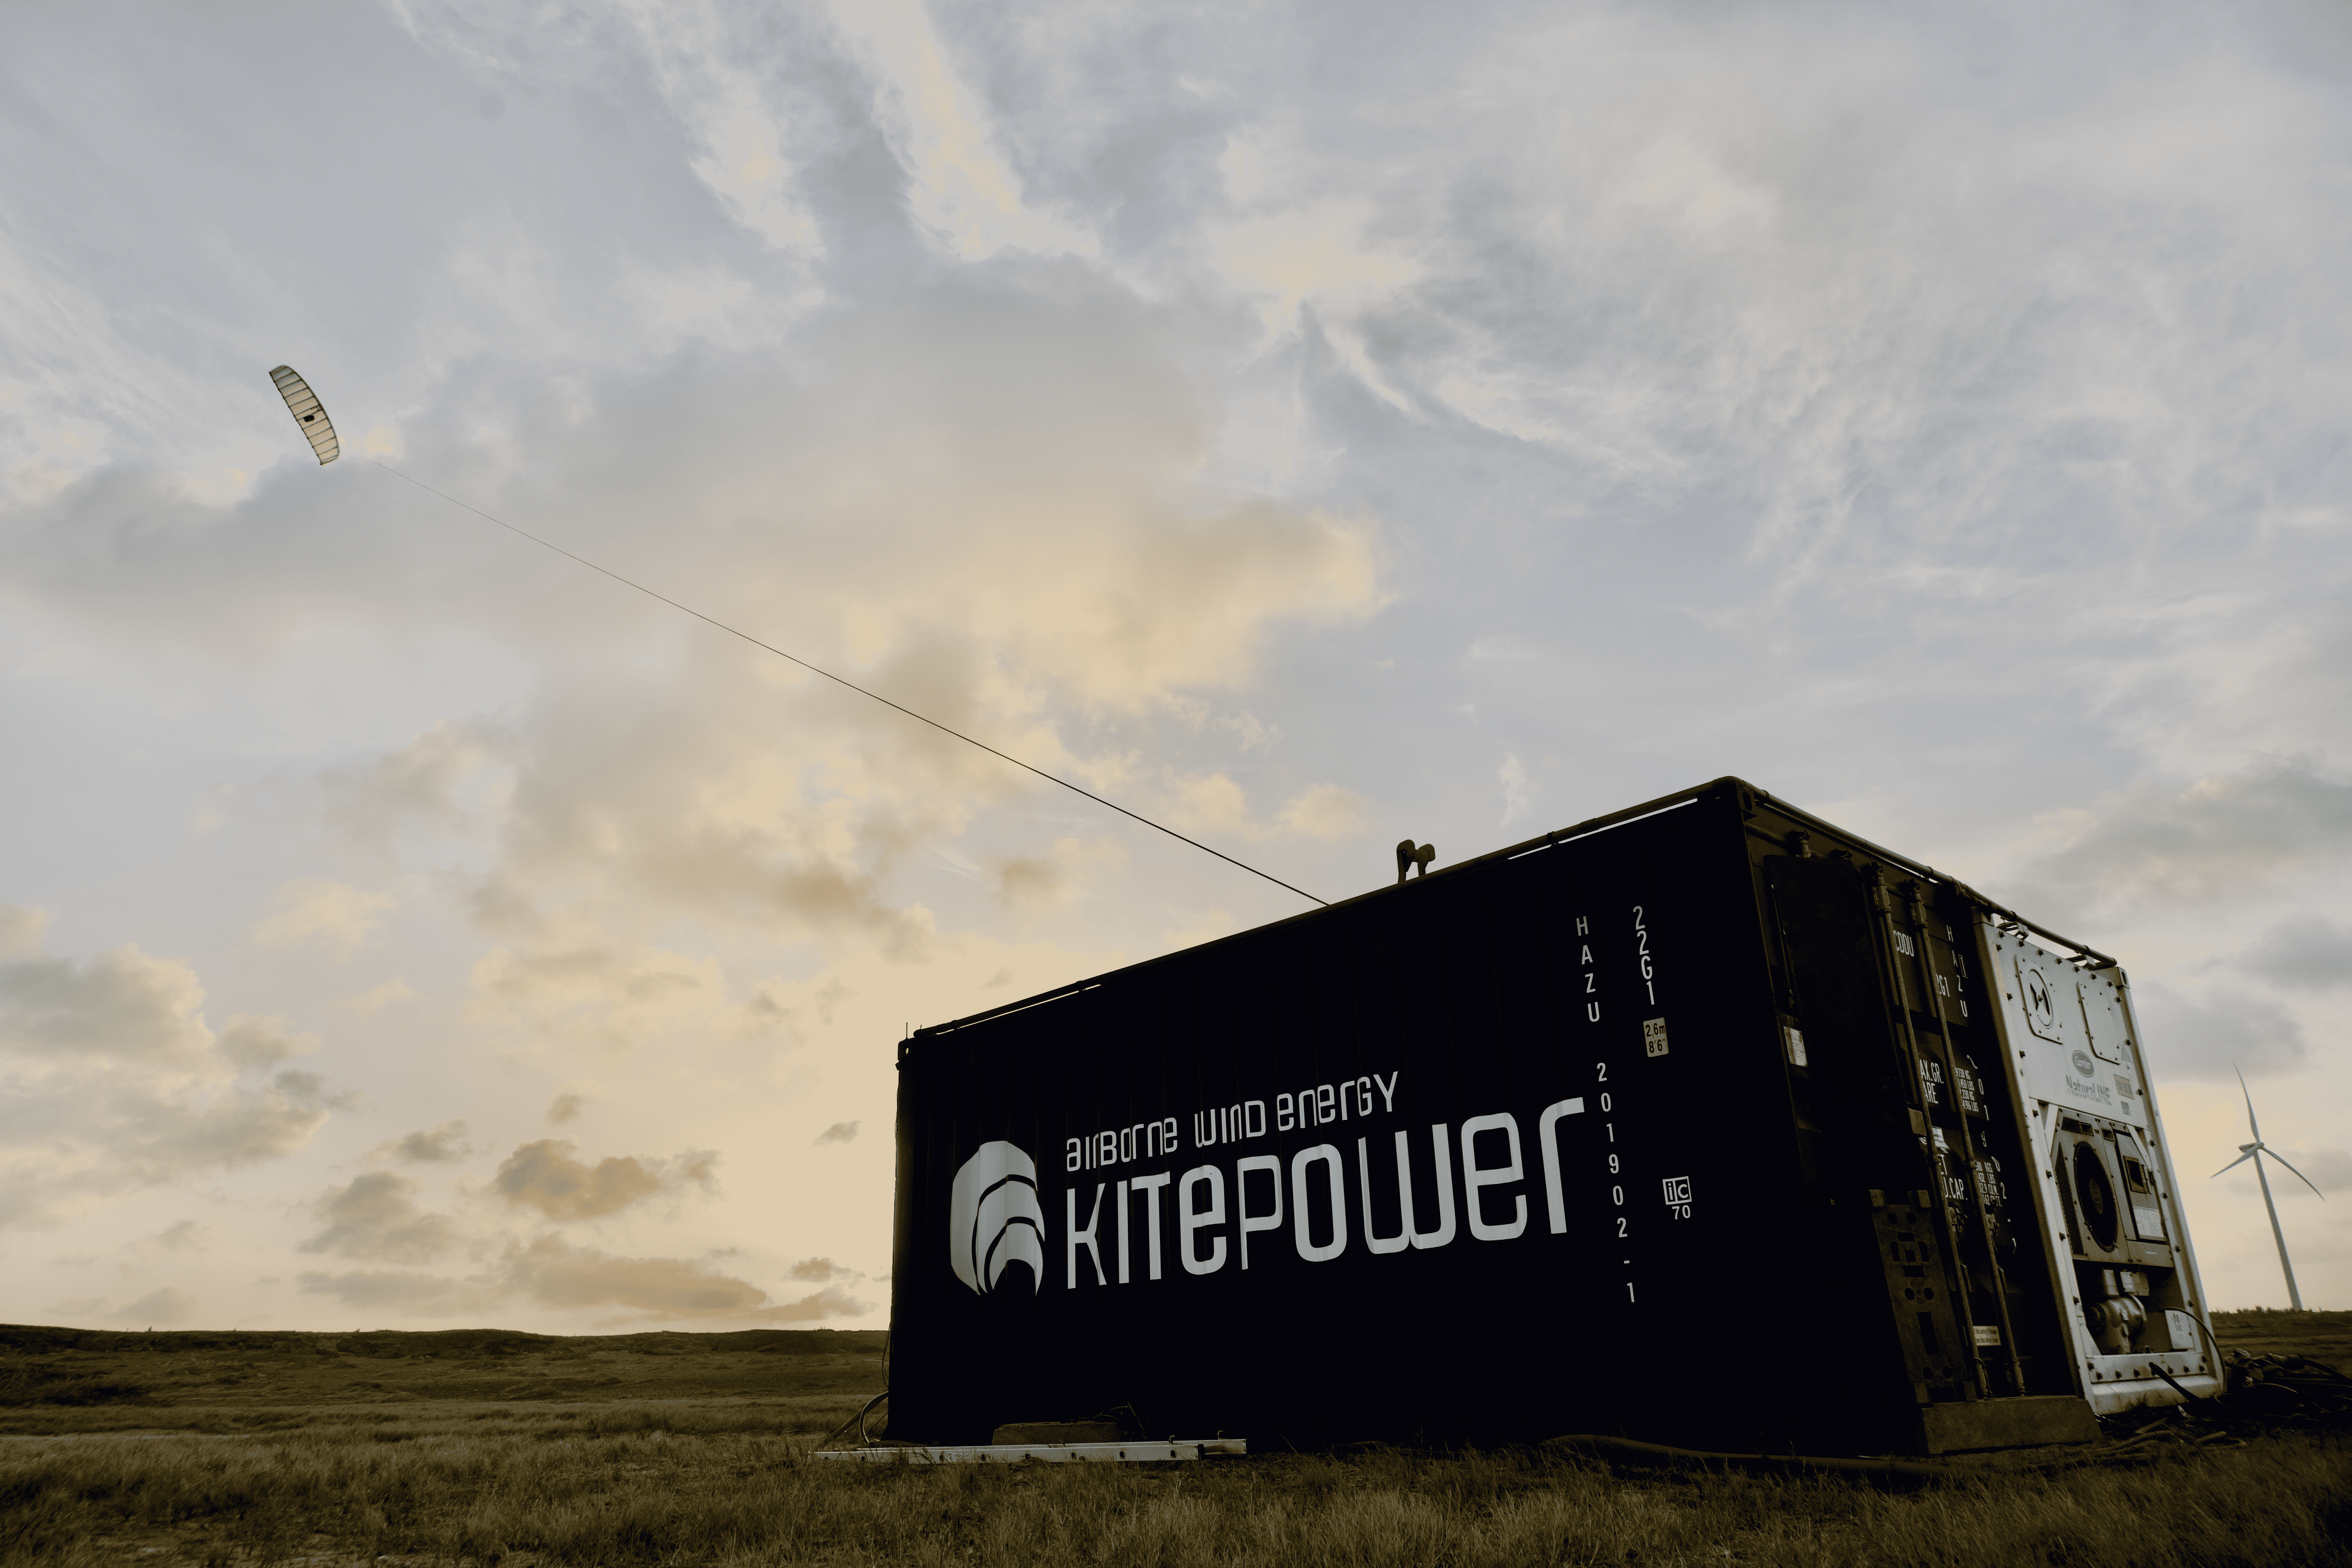 Kitepower displays the 'miracle of airborne energy'